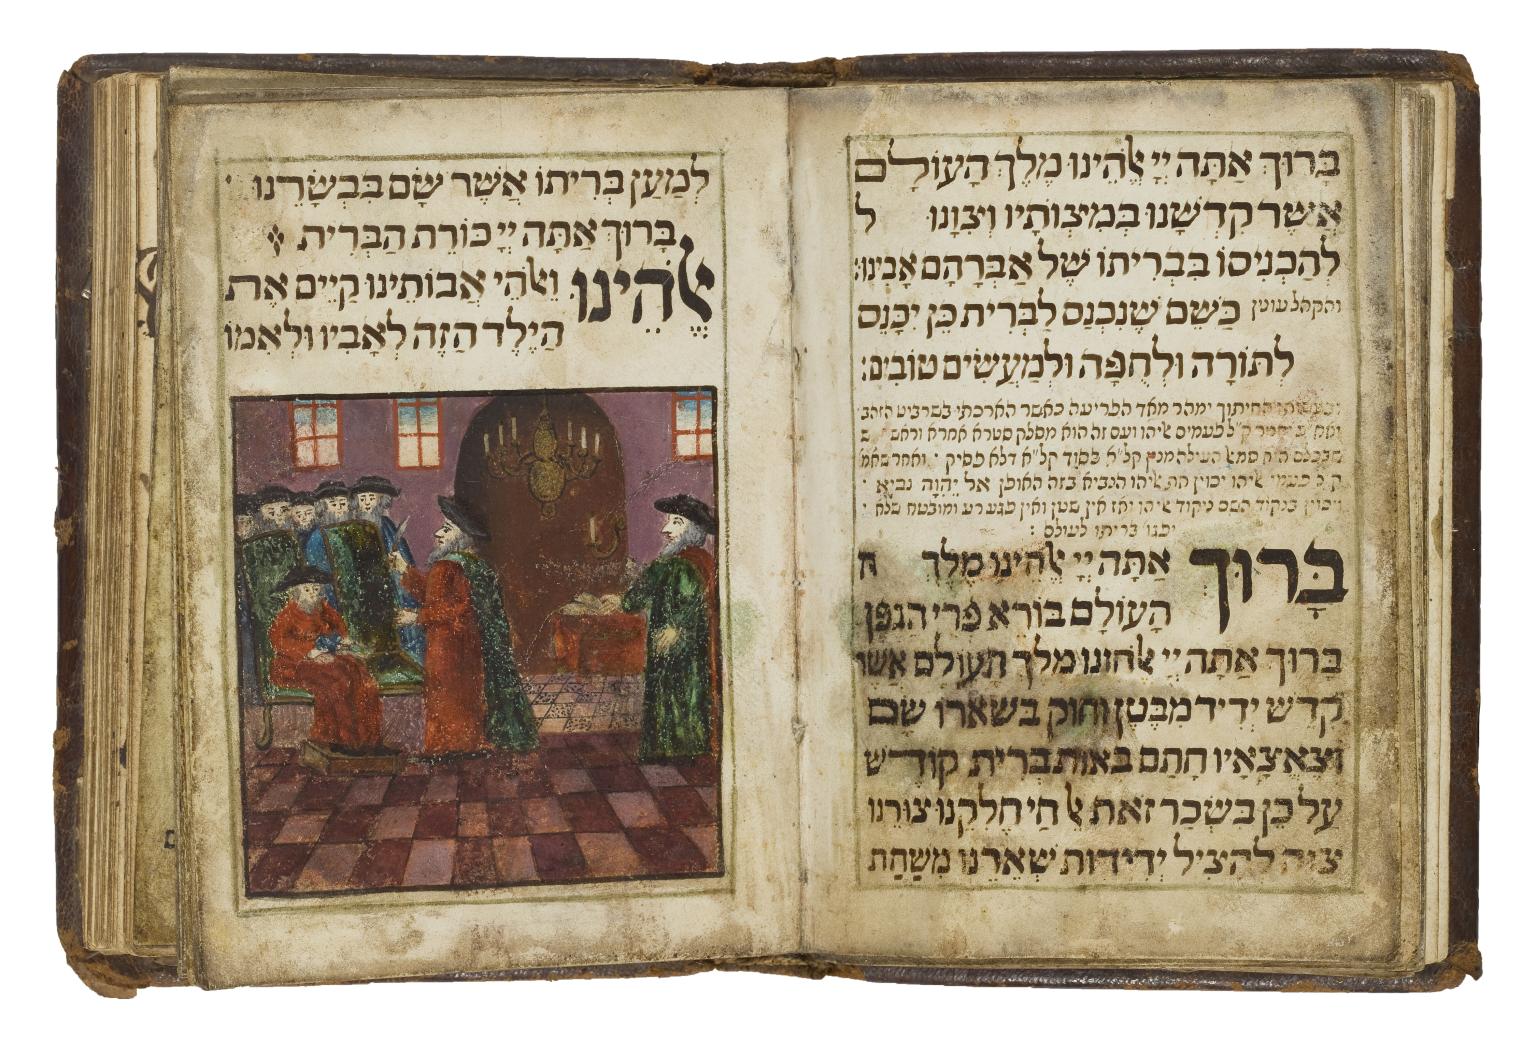 Facing-page manuscript with Hebrew text on right-hand page and illustration of figures wearing hats and robes under Hebrew text on left-hand page.